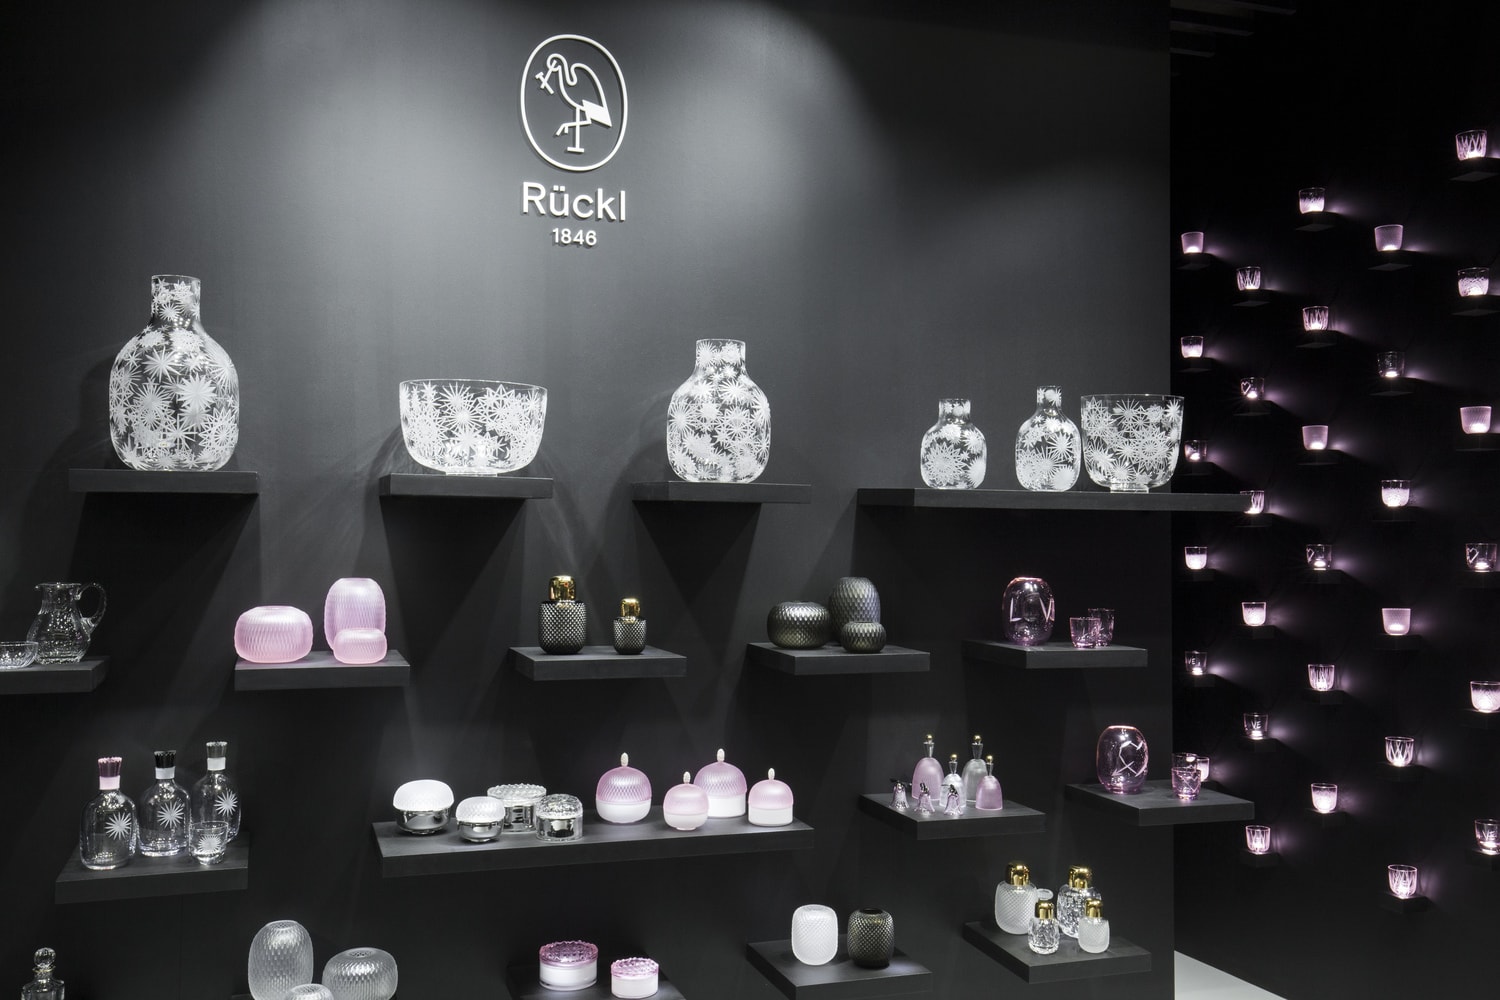 The exhibition stand for Rückl Crystal at the Ambiente Fair Frankfurt 2018. Rückl is a Bohemian glass factory founded in 1846 in Nižbor, specialised in glassware. Designed by Jiri Krejcirik.